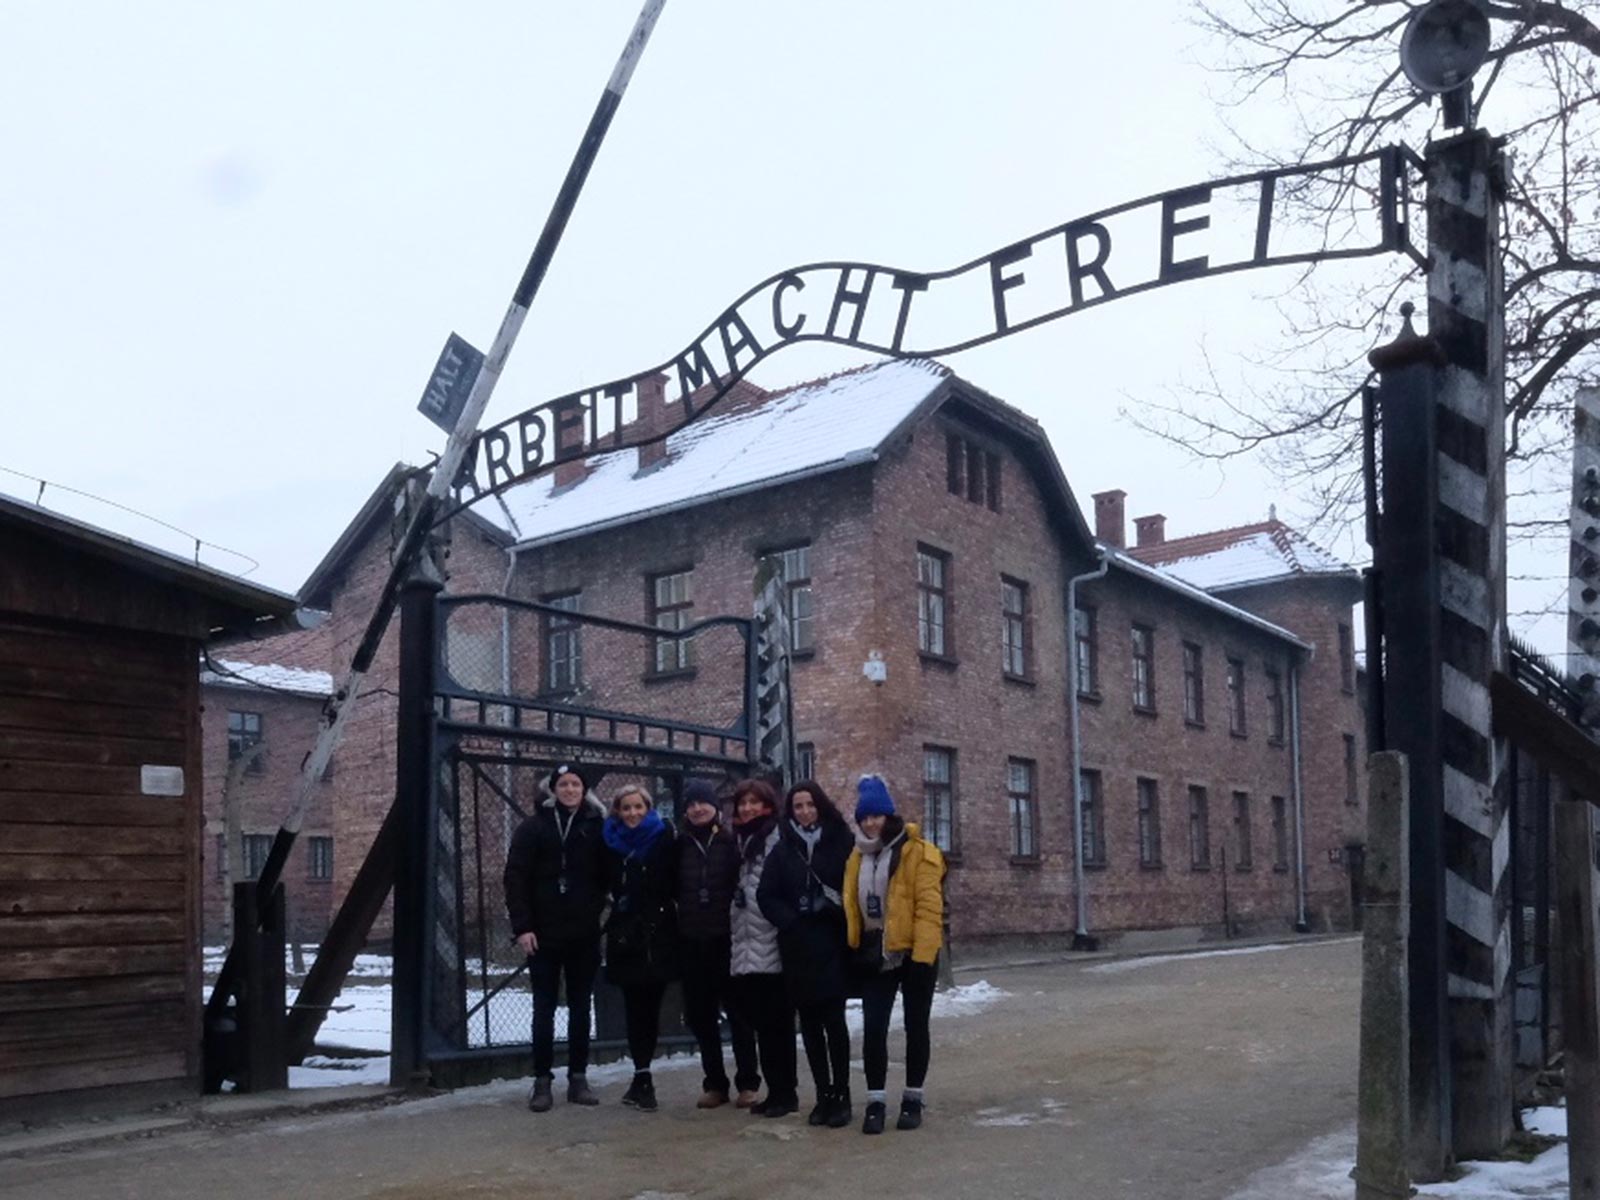 David Simpson and family at the gate in Auschwitz, Oświęcim, Poland. Mixed feelings in Auschwitz